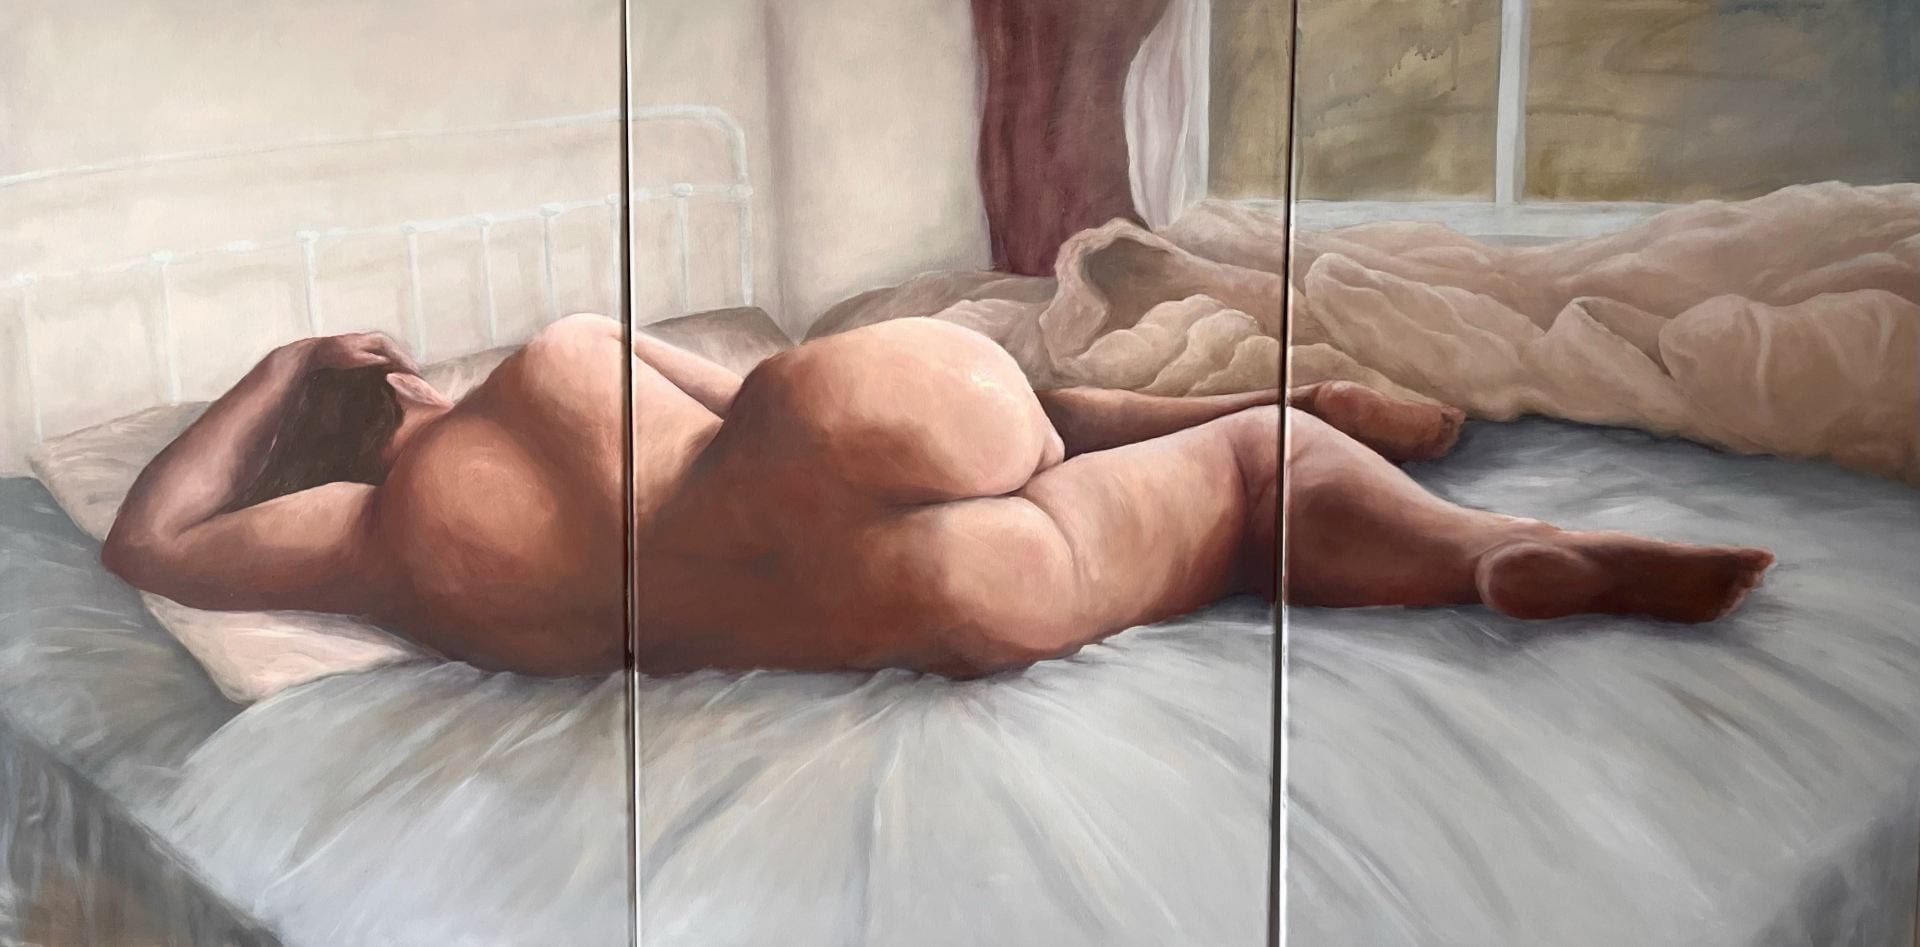 Oil painting depicting a female presenting figure reclining on a bed with back facing the viewer